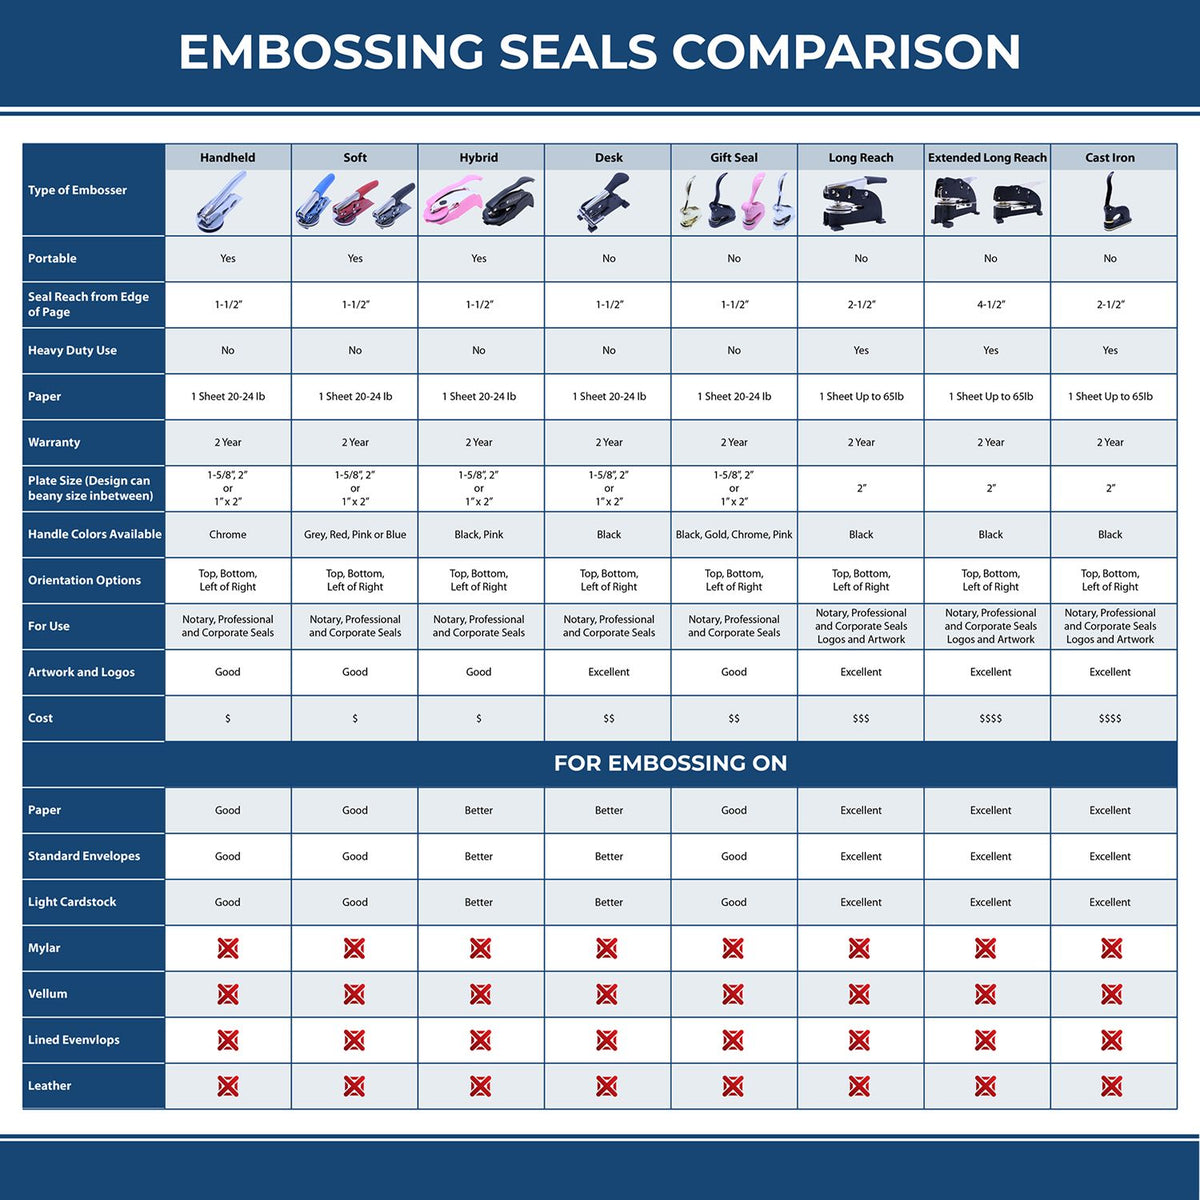 A comparison chart for the different types of mount models available for the Handheld New York Architect Seal Embosser.